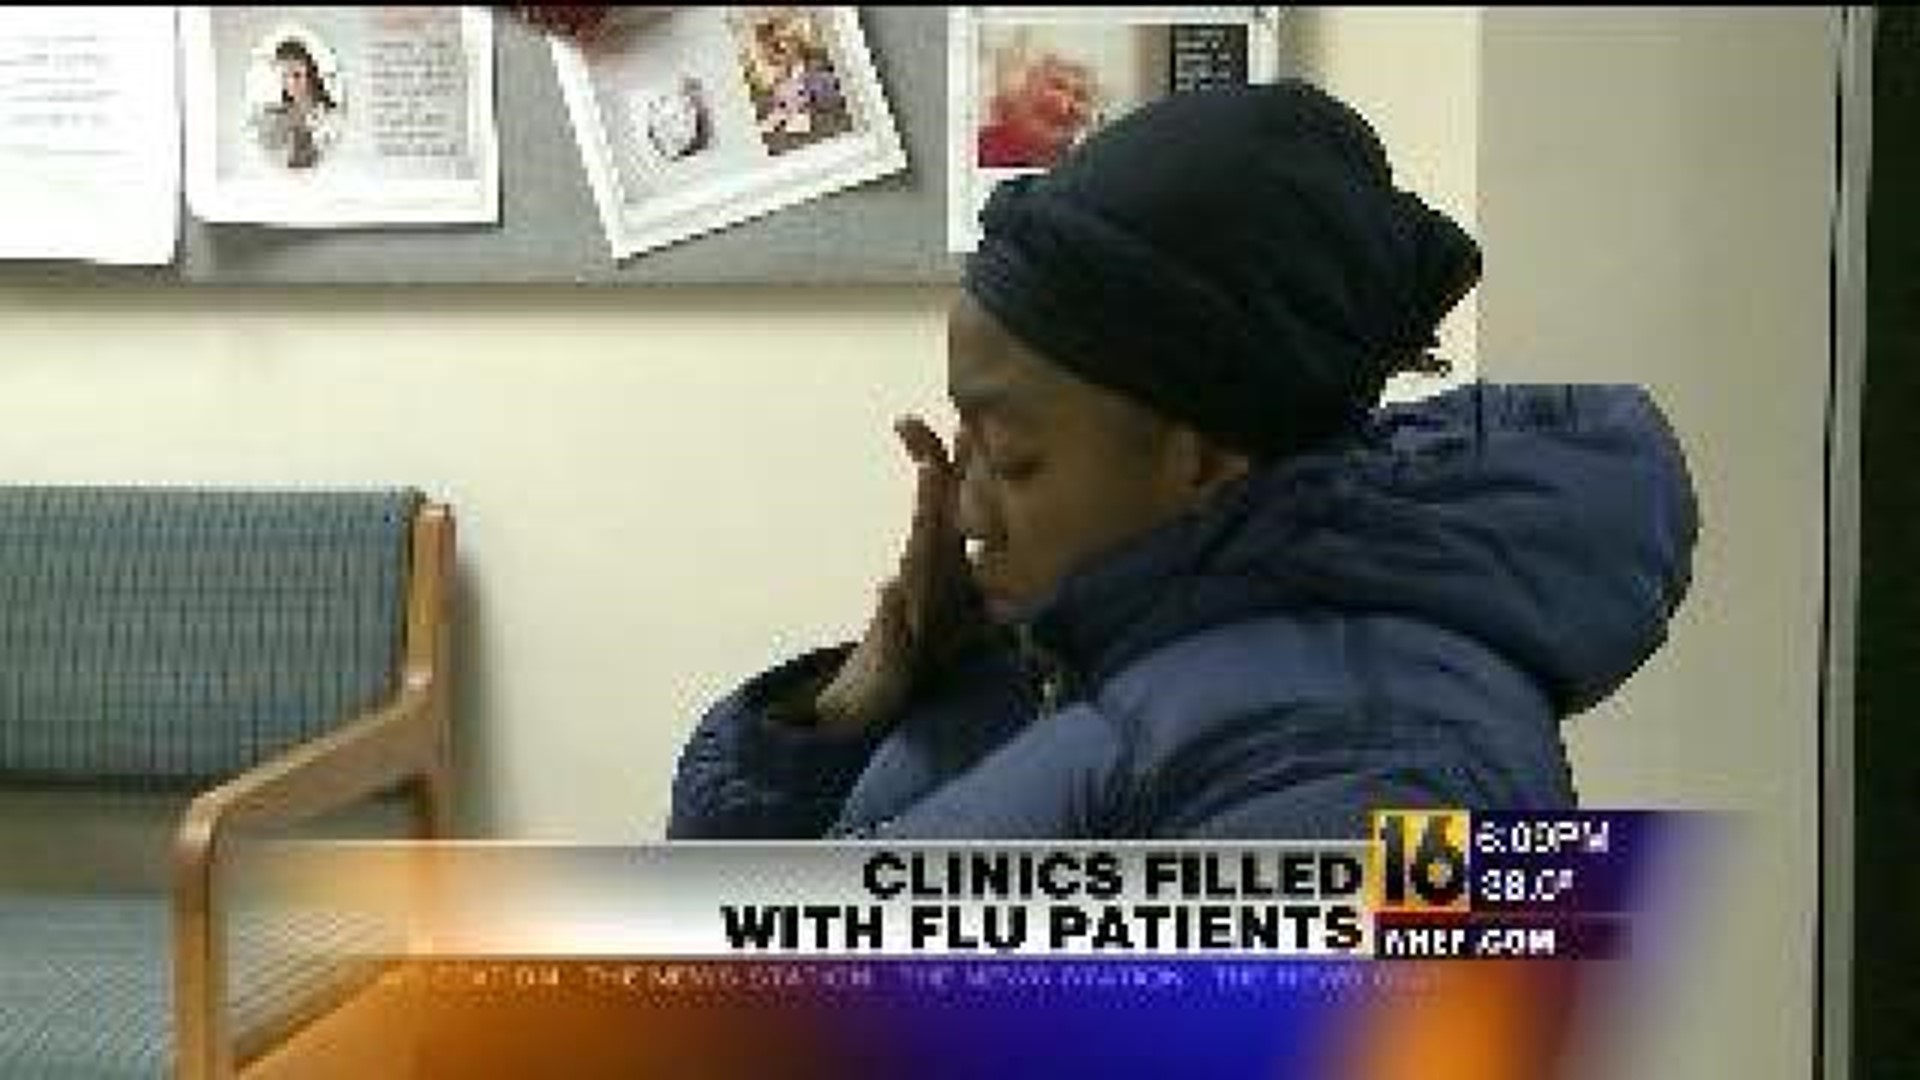 Clinics Filled With Flu Patients